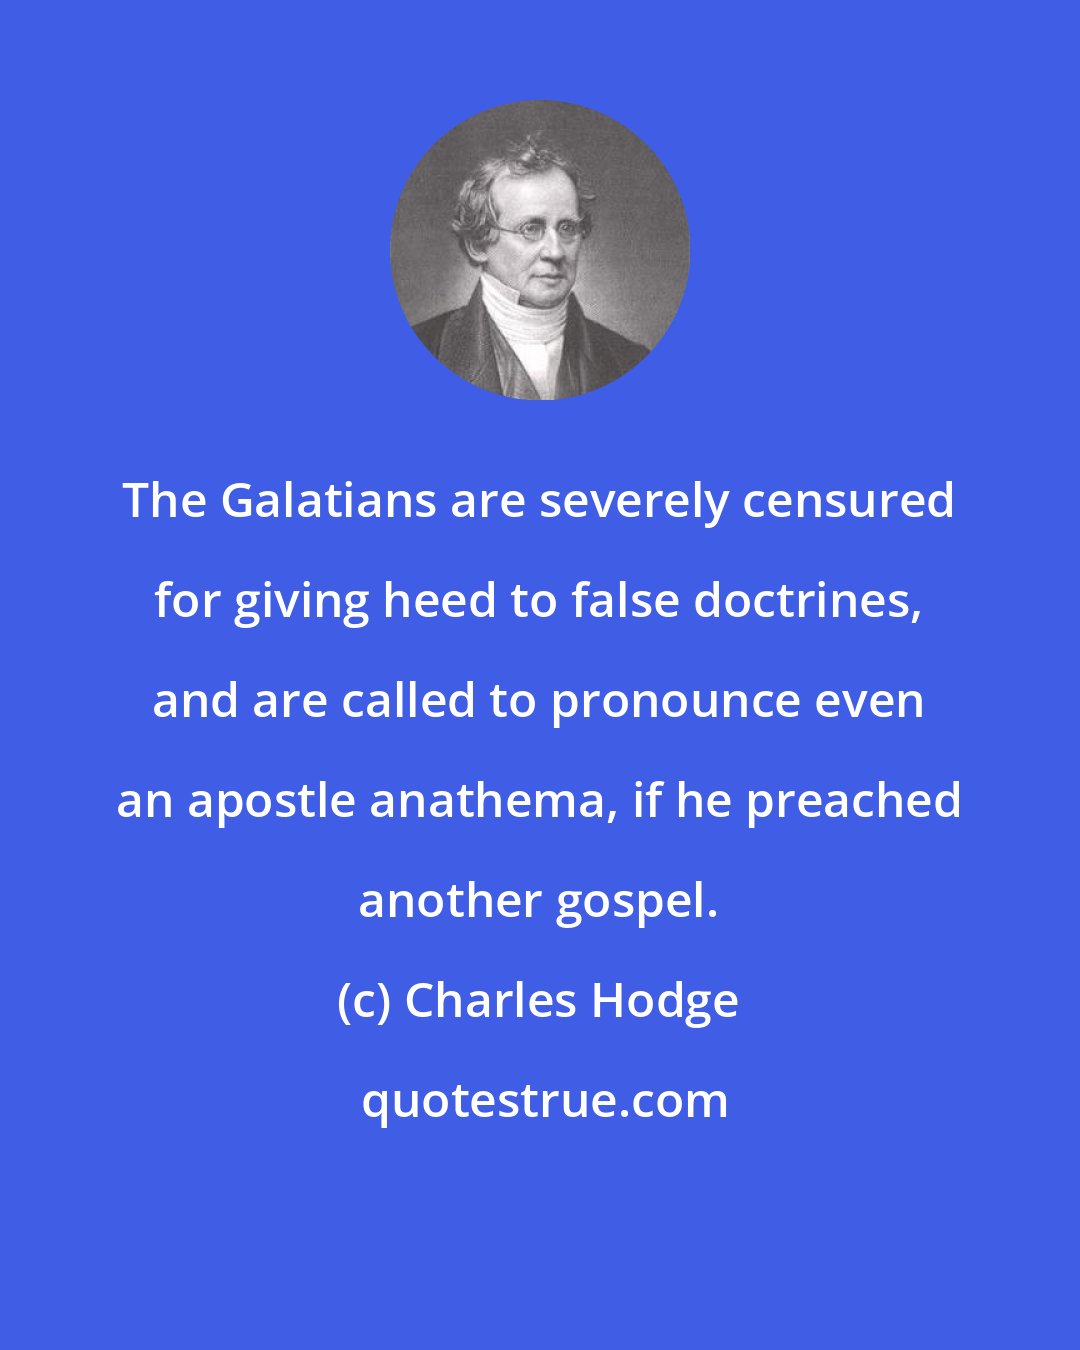 Charles Hodge: The Galatians are severely censured for giving heed to false doctrines, and are called to pronounce even an apostle anathema, if he preached another gospel.